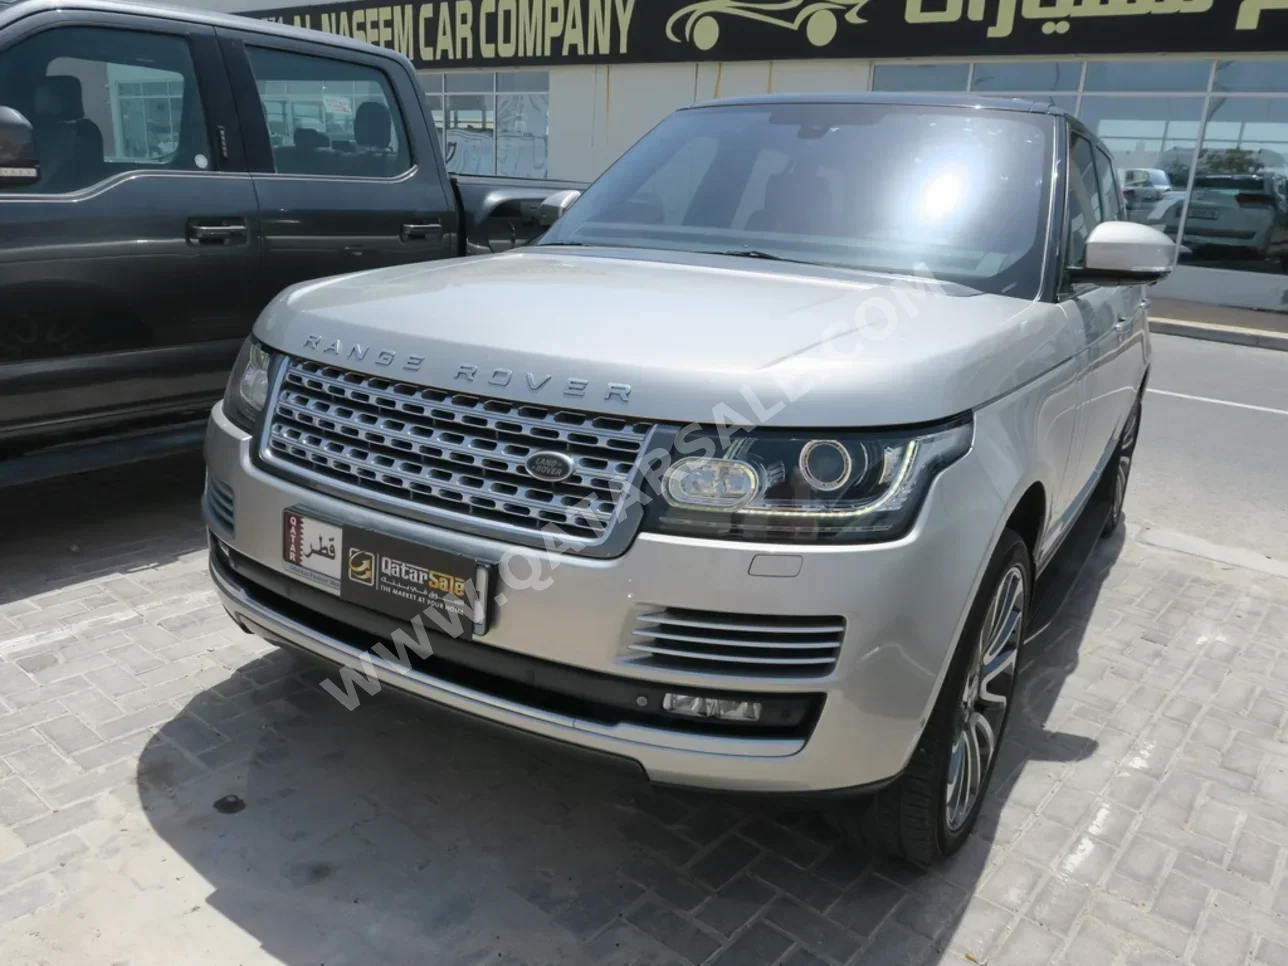 Land Rover  Range Rover  Vogue SE  2015  Automatic  140,000 Km  8 Cylinder  Four Wheel Drive (4WD)  SUV  Silver